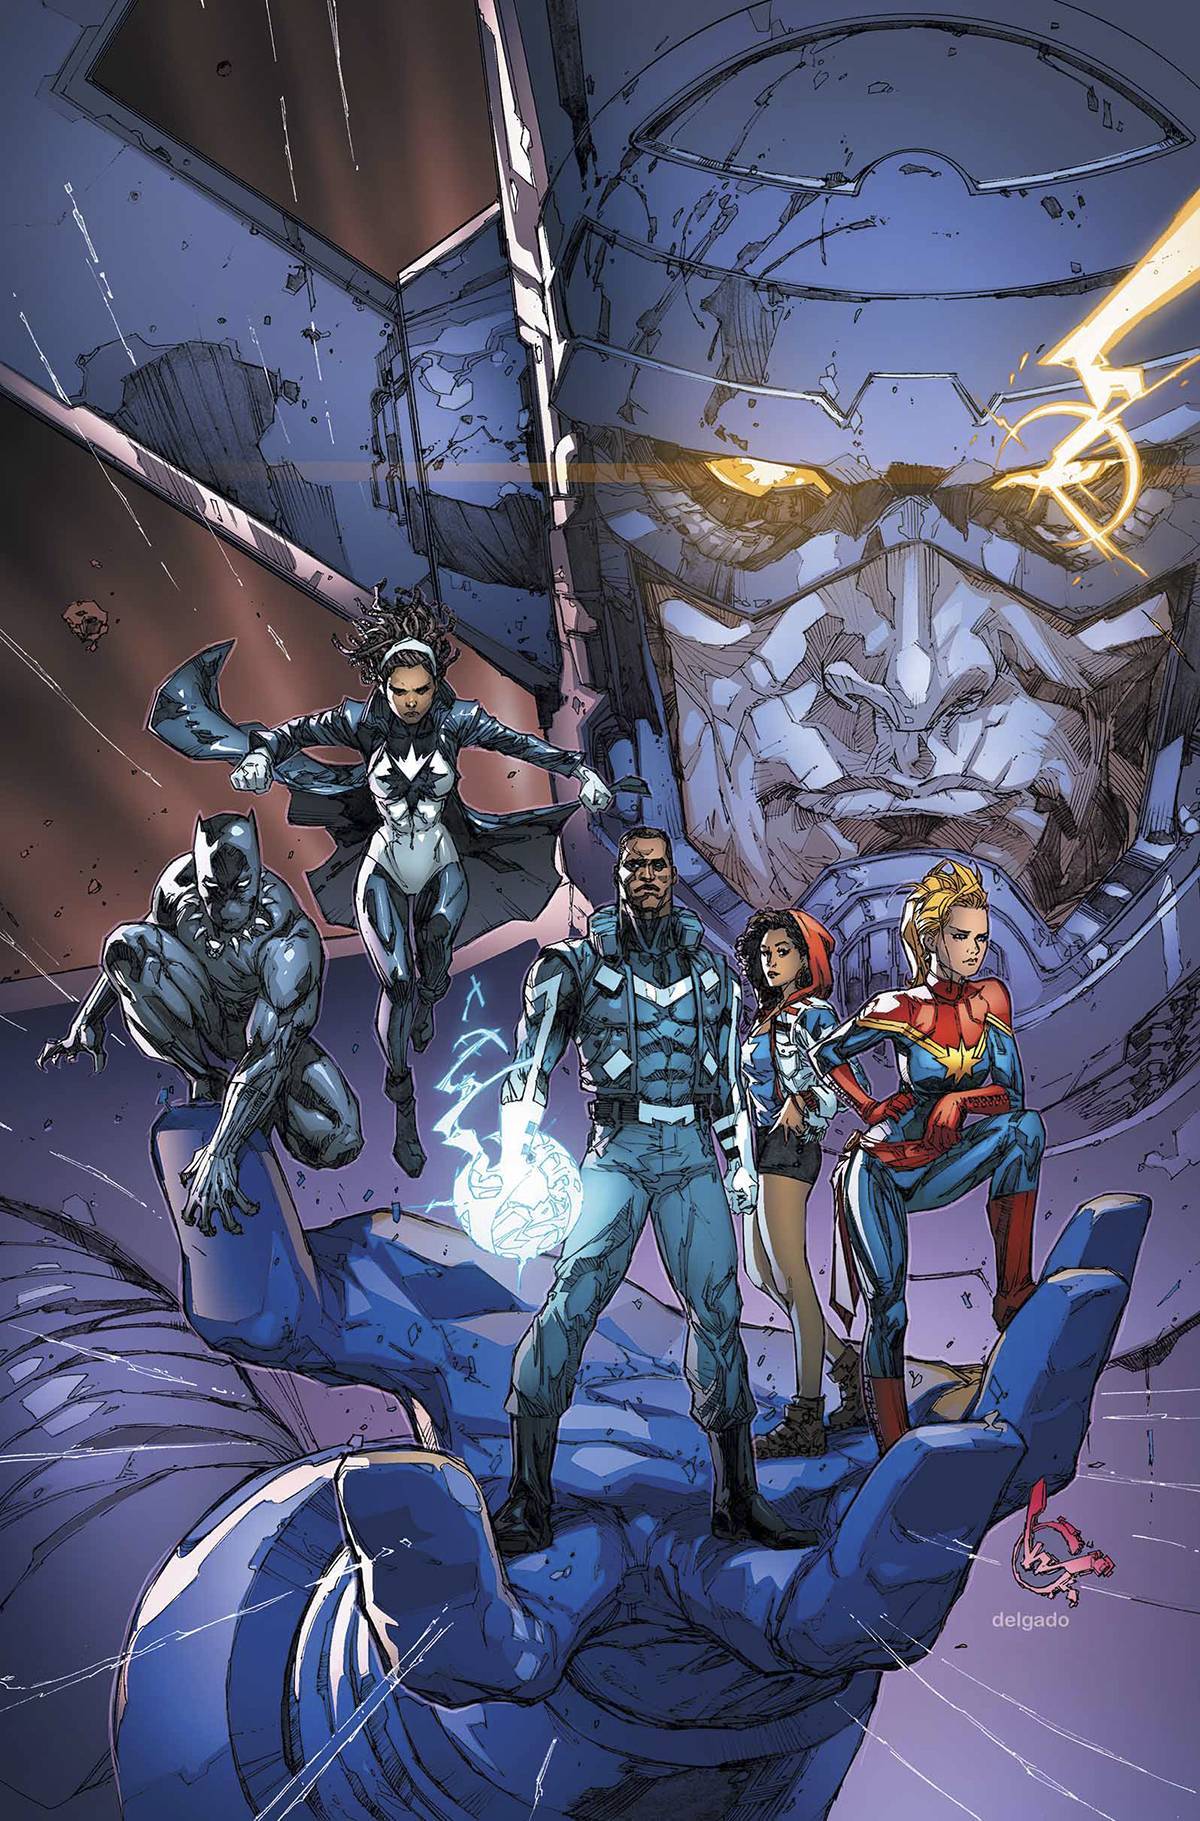 The Ultimates are dead - long live The Ultimates! Black Panther, the Blue Marvel, Ms America Chavez, Spectrum and Captain Marvel join forces as the new Ultimates to take down the biggest threat in all reality… Galactus, the World Eater!
Look for The...